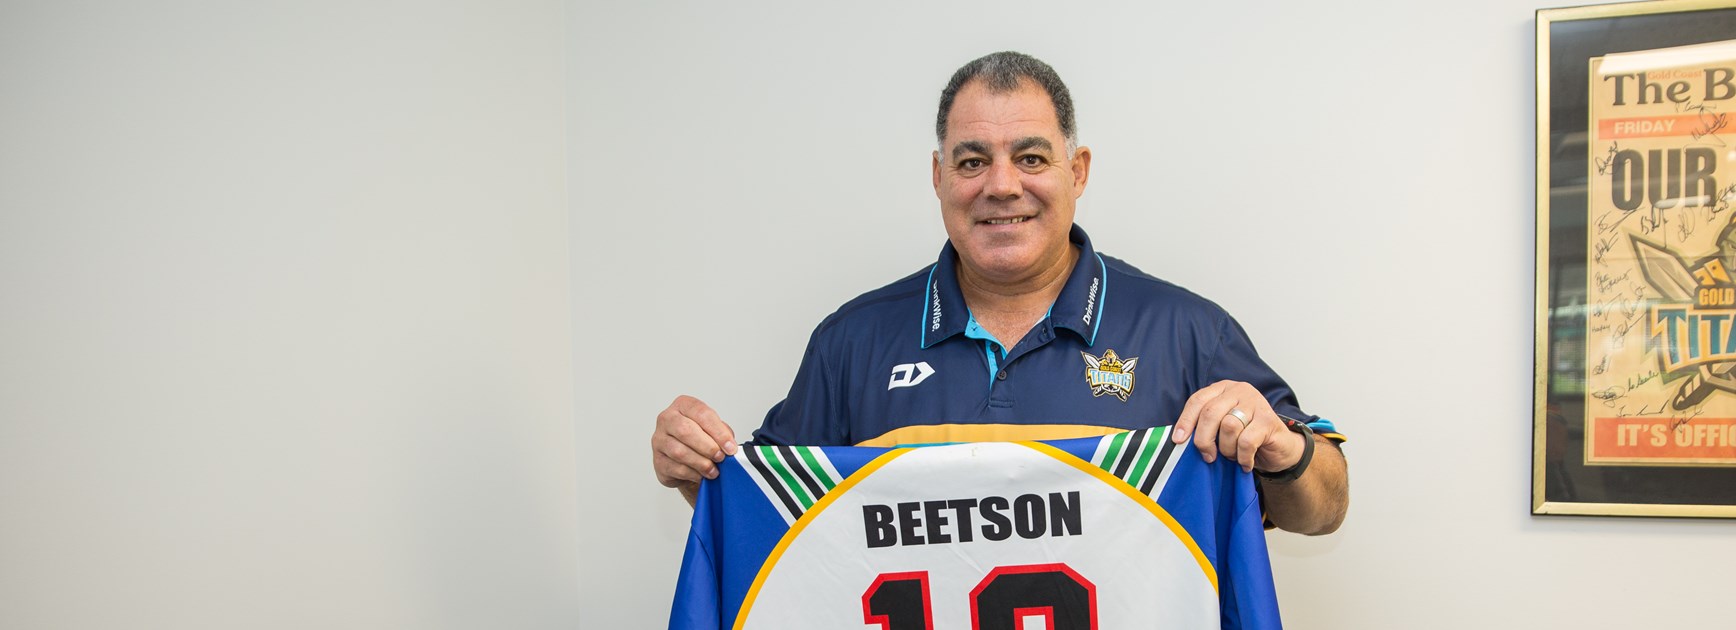 Meninga, Inglis And The Greatest  Team Selection Story Never Told